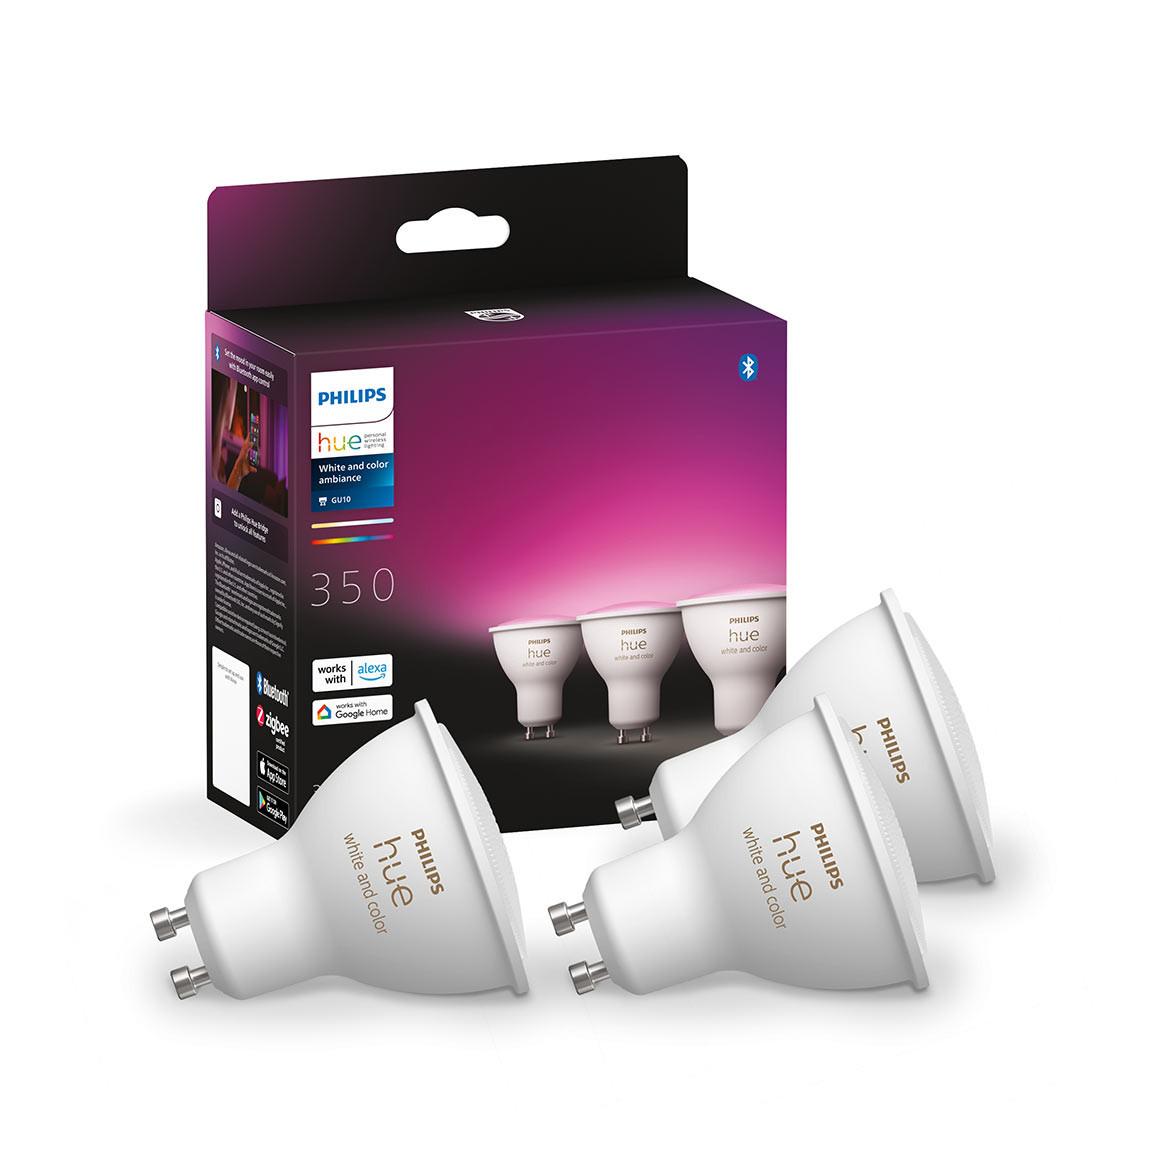 Philips Hue White & Color Ambiance GU10 Bluetooth Starter Kit + Google Nest Mini_Verpackung